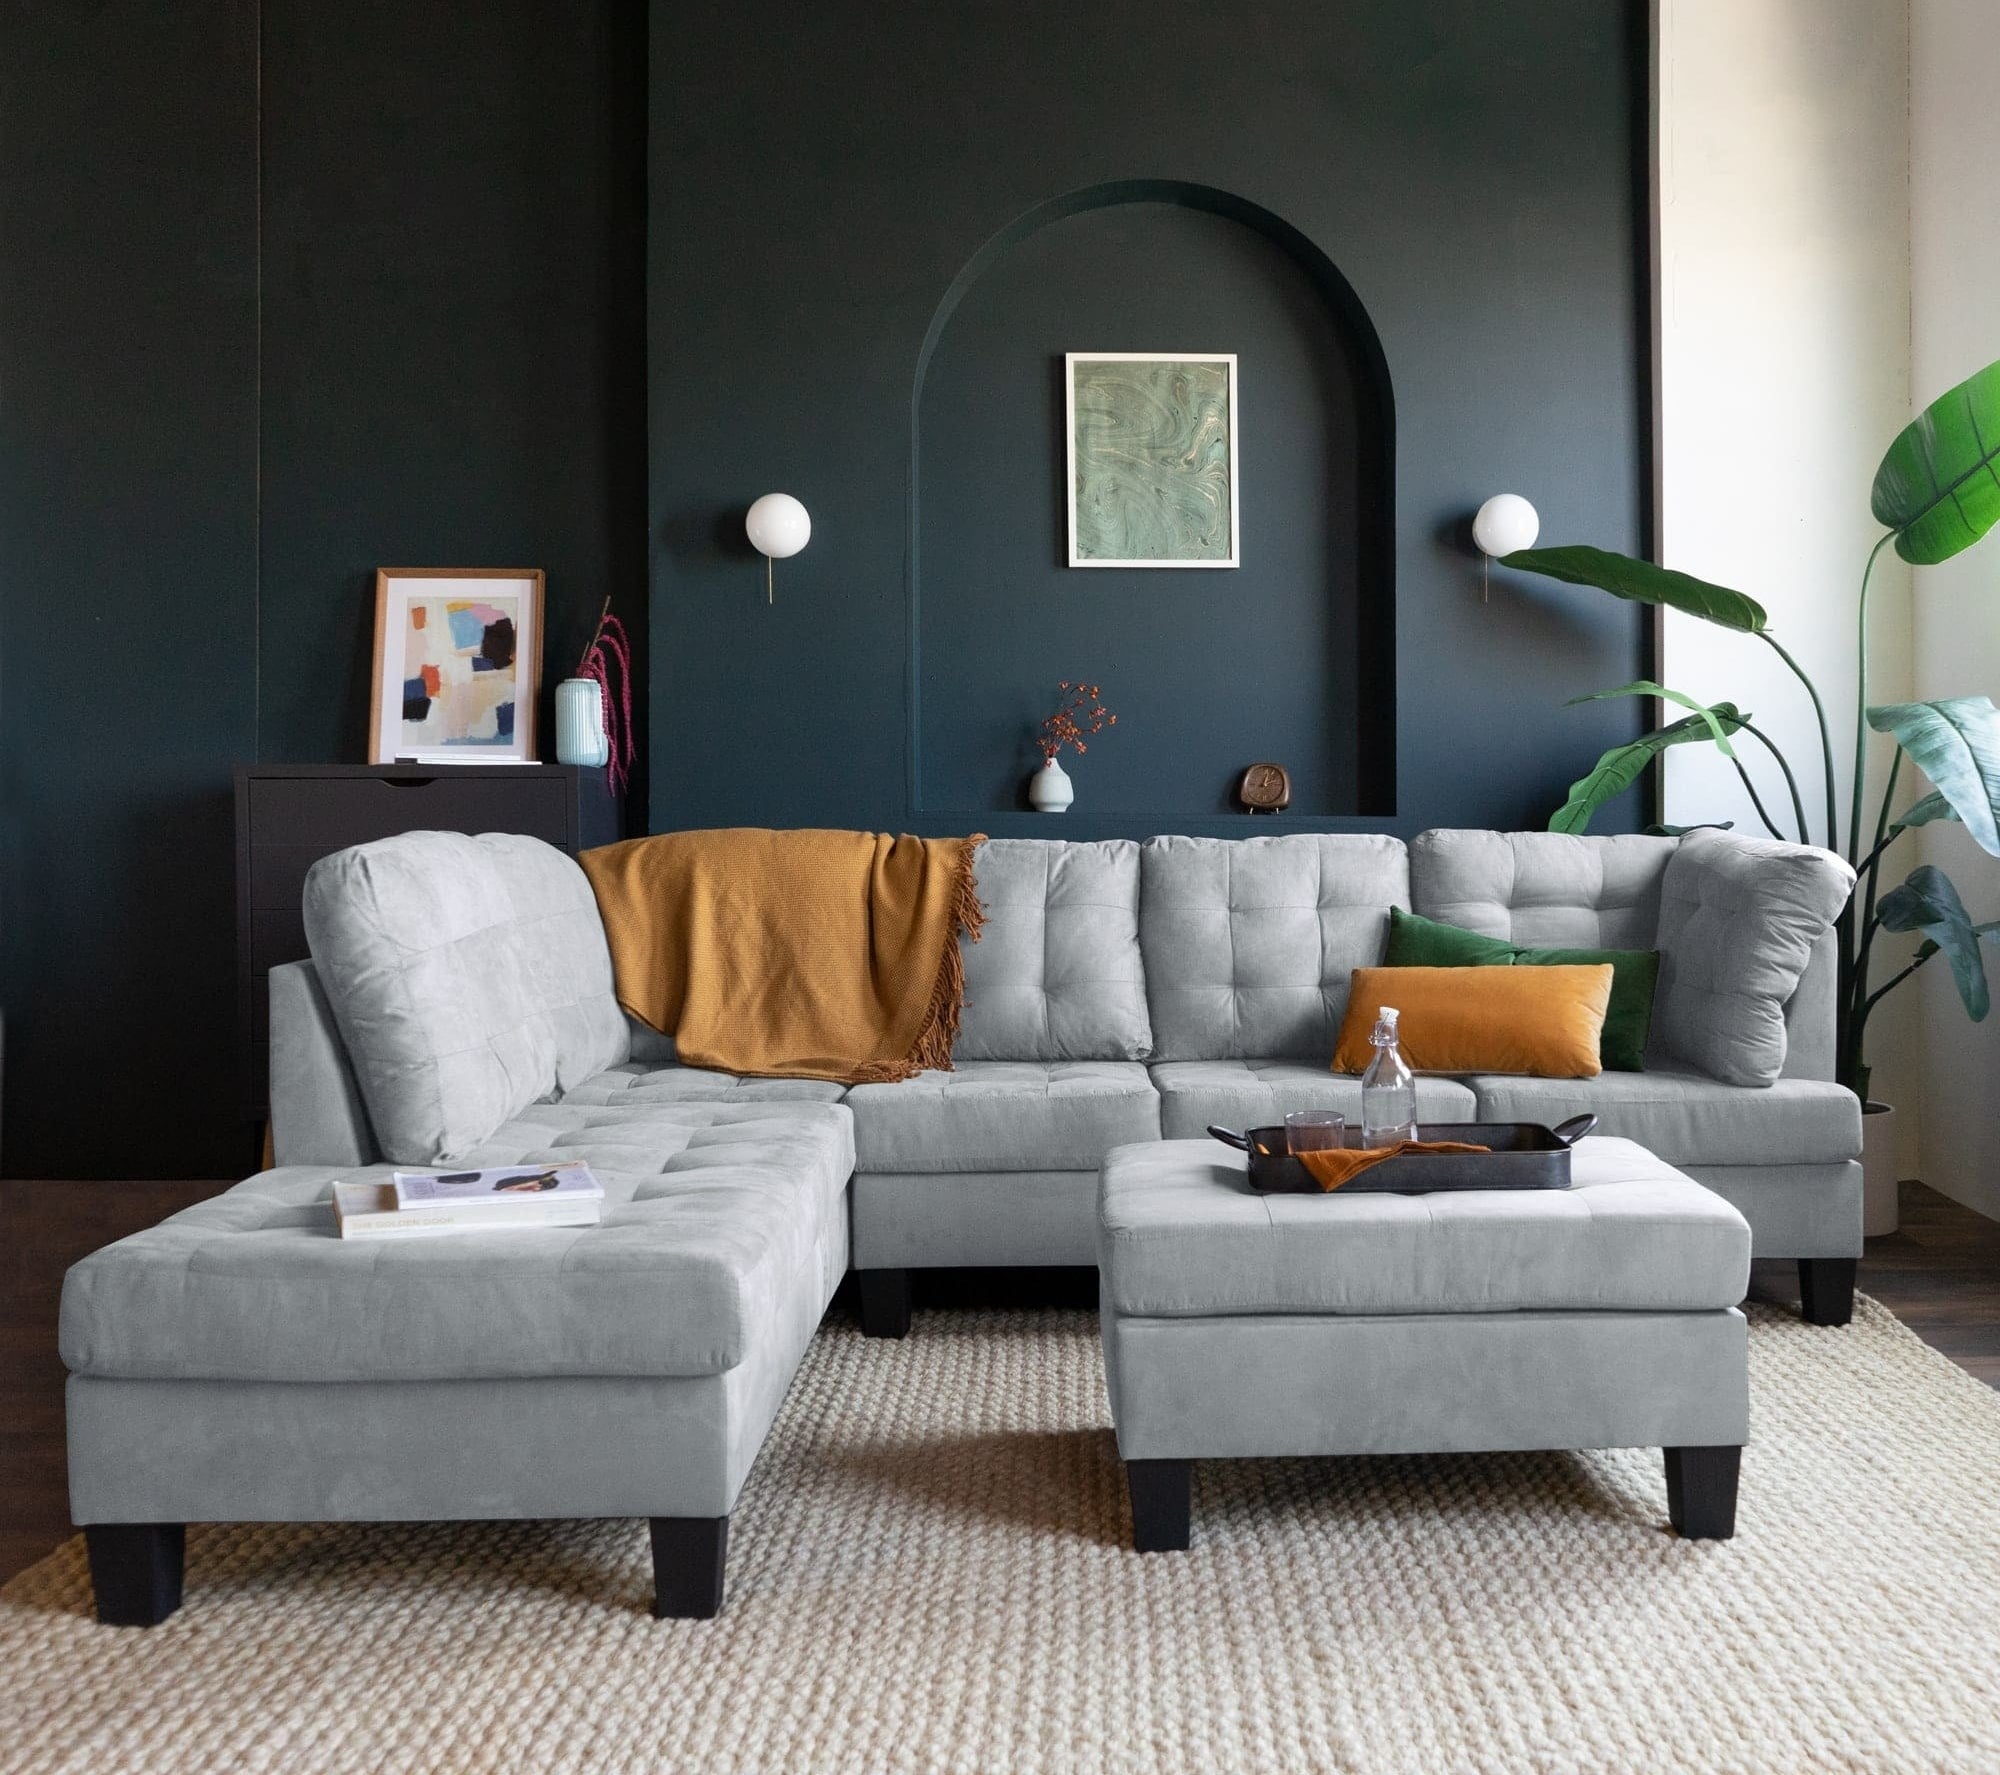 Light gray three-piece sectional set in a living room